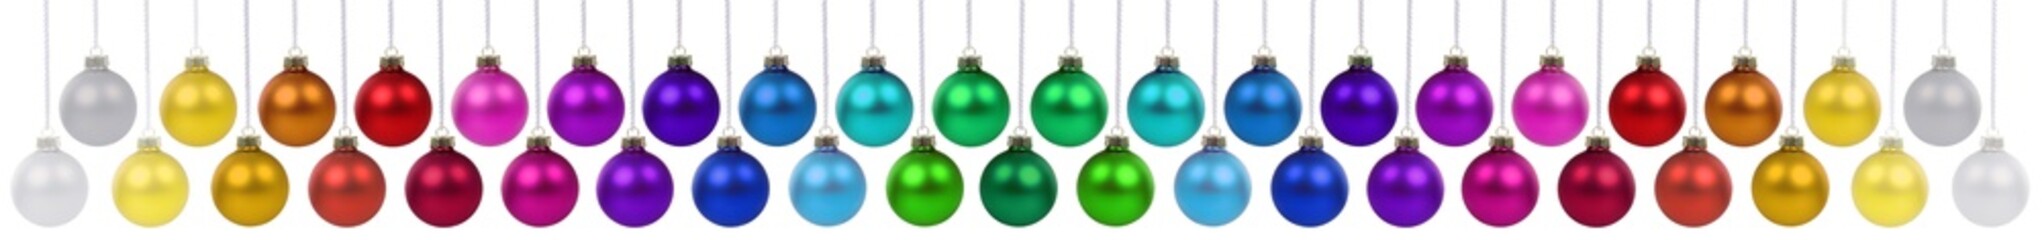 Christmas balls many baubles banner decoration collection of ornaments hanging isolated on white